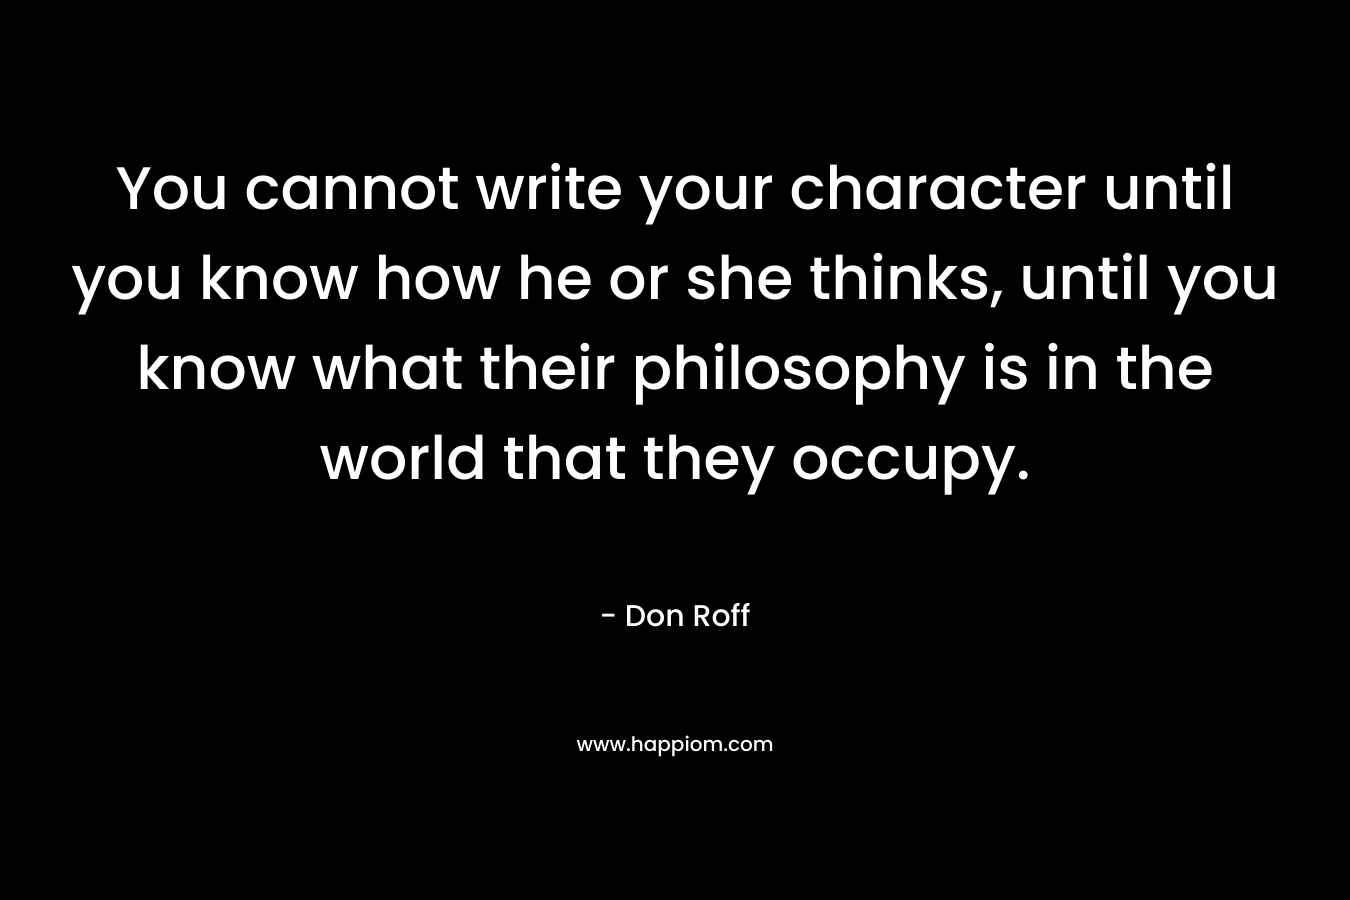 You cannot write your character until you know how he or she thinks, until you know what their philosophy is in the world that they occupy.